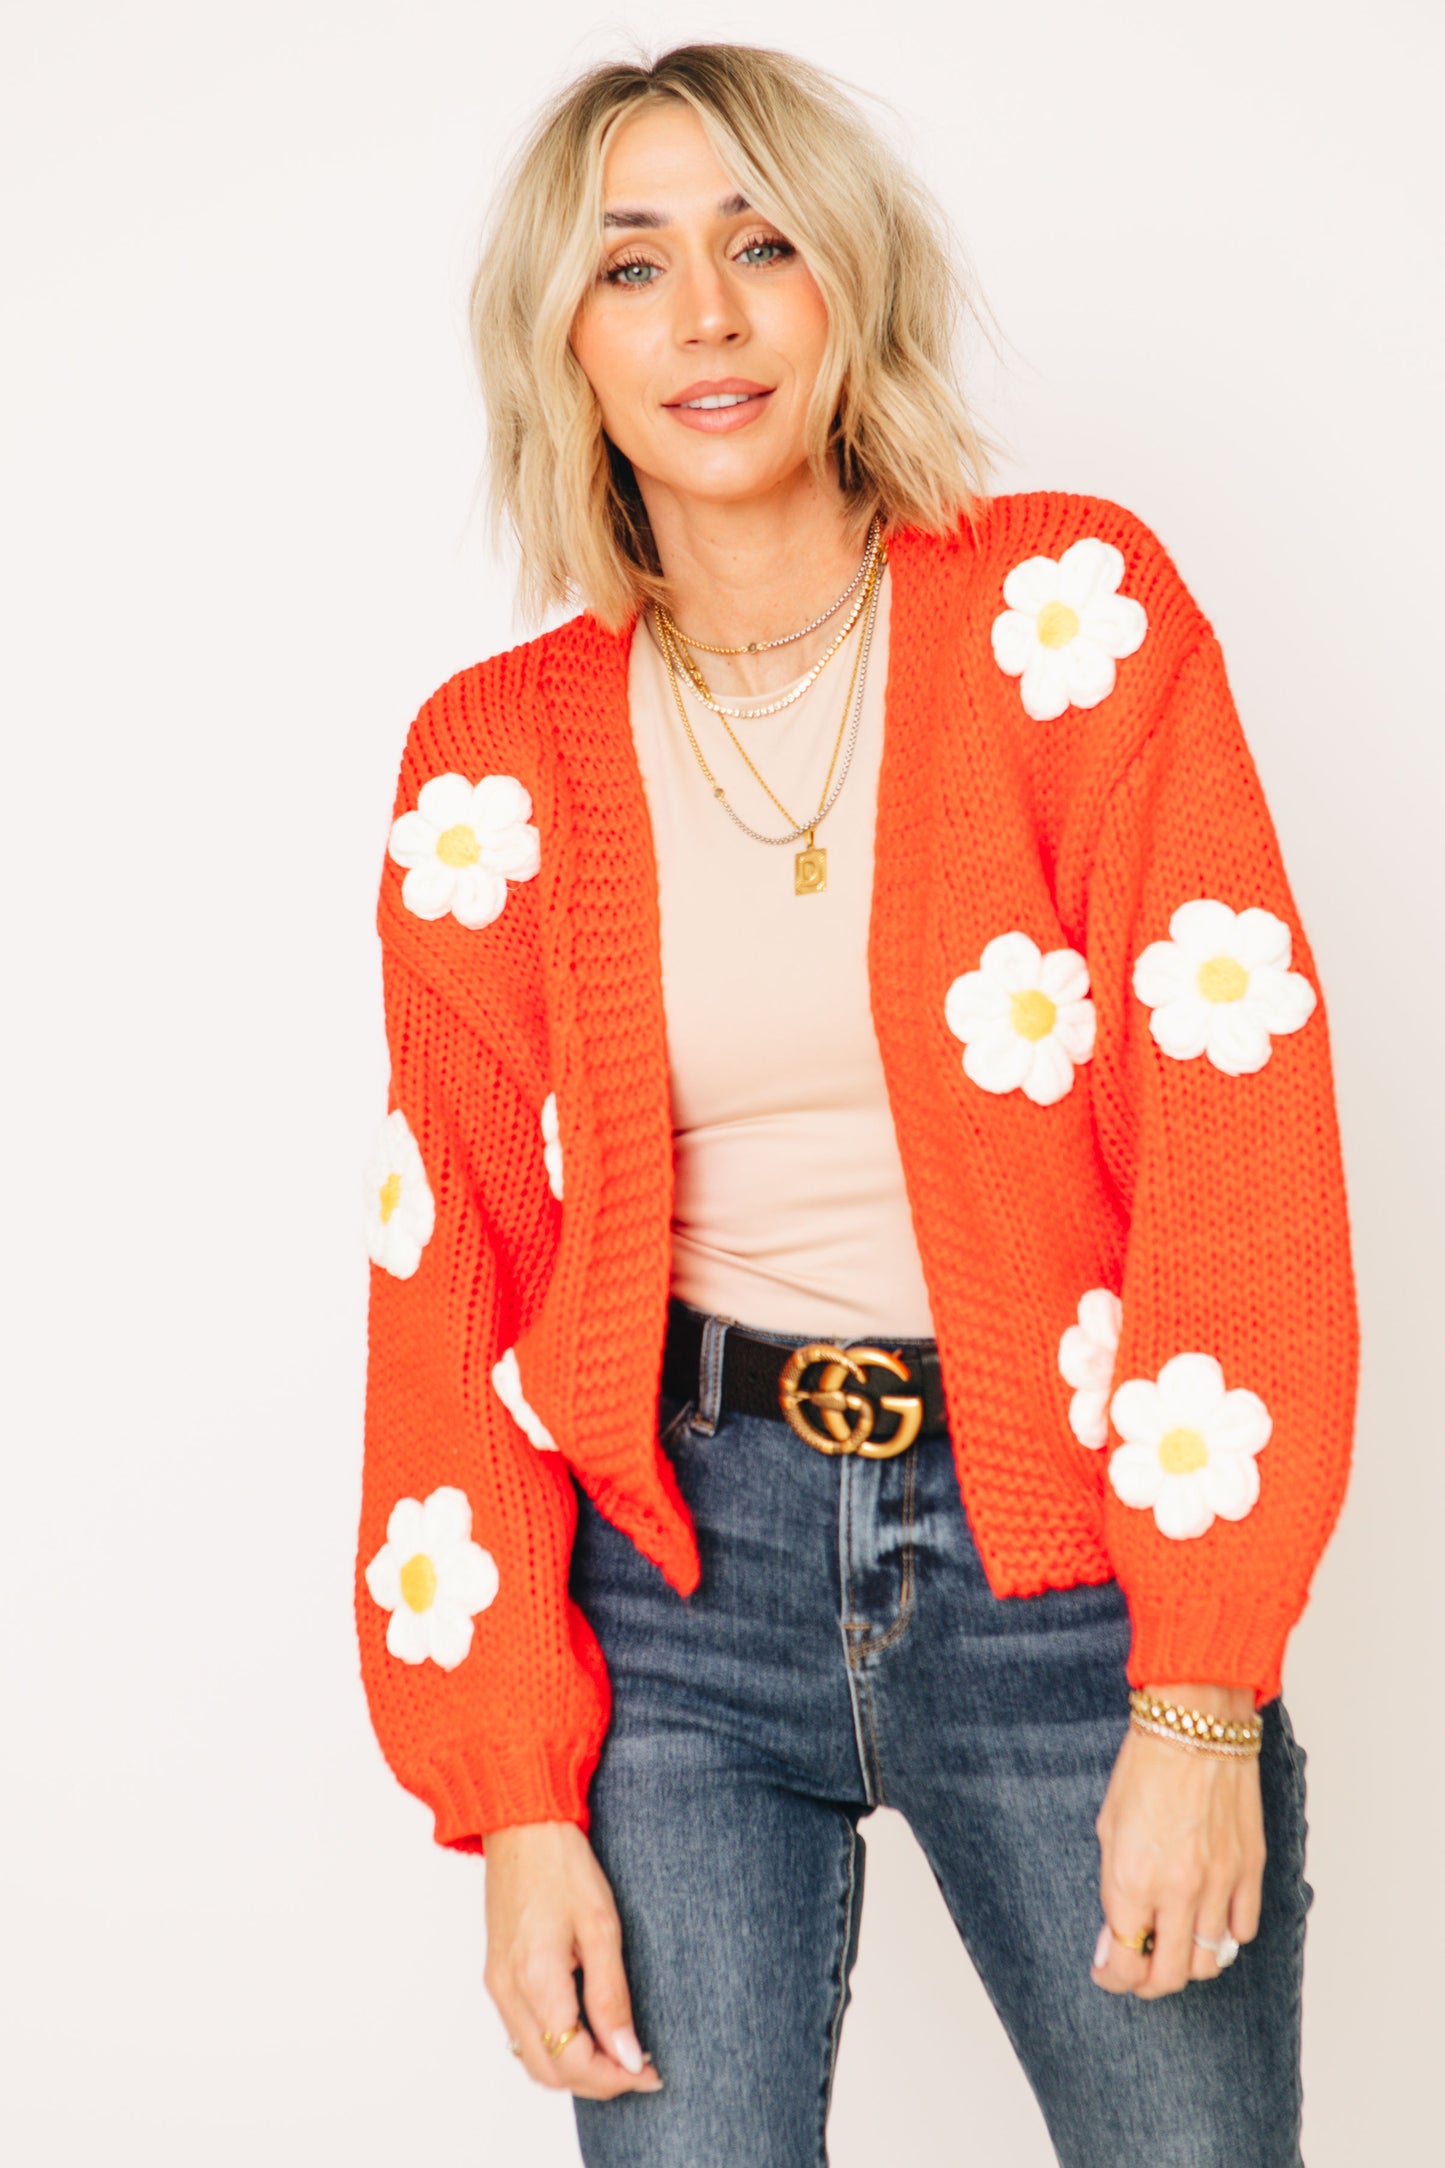 Ivy Exclusive - Pocket Full of Daisies Cardigan (S-3XL)